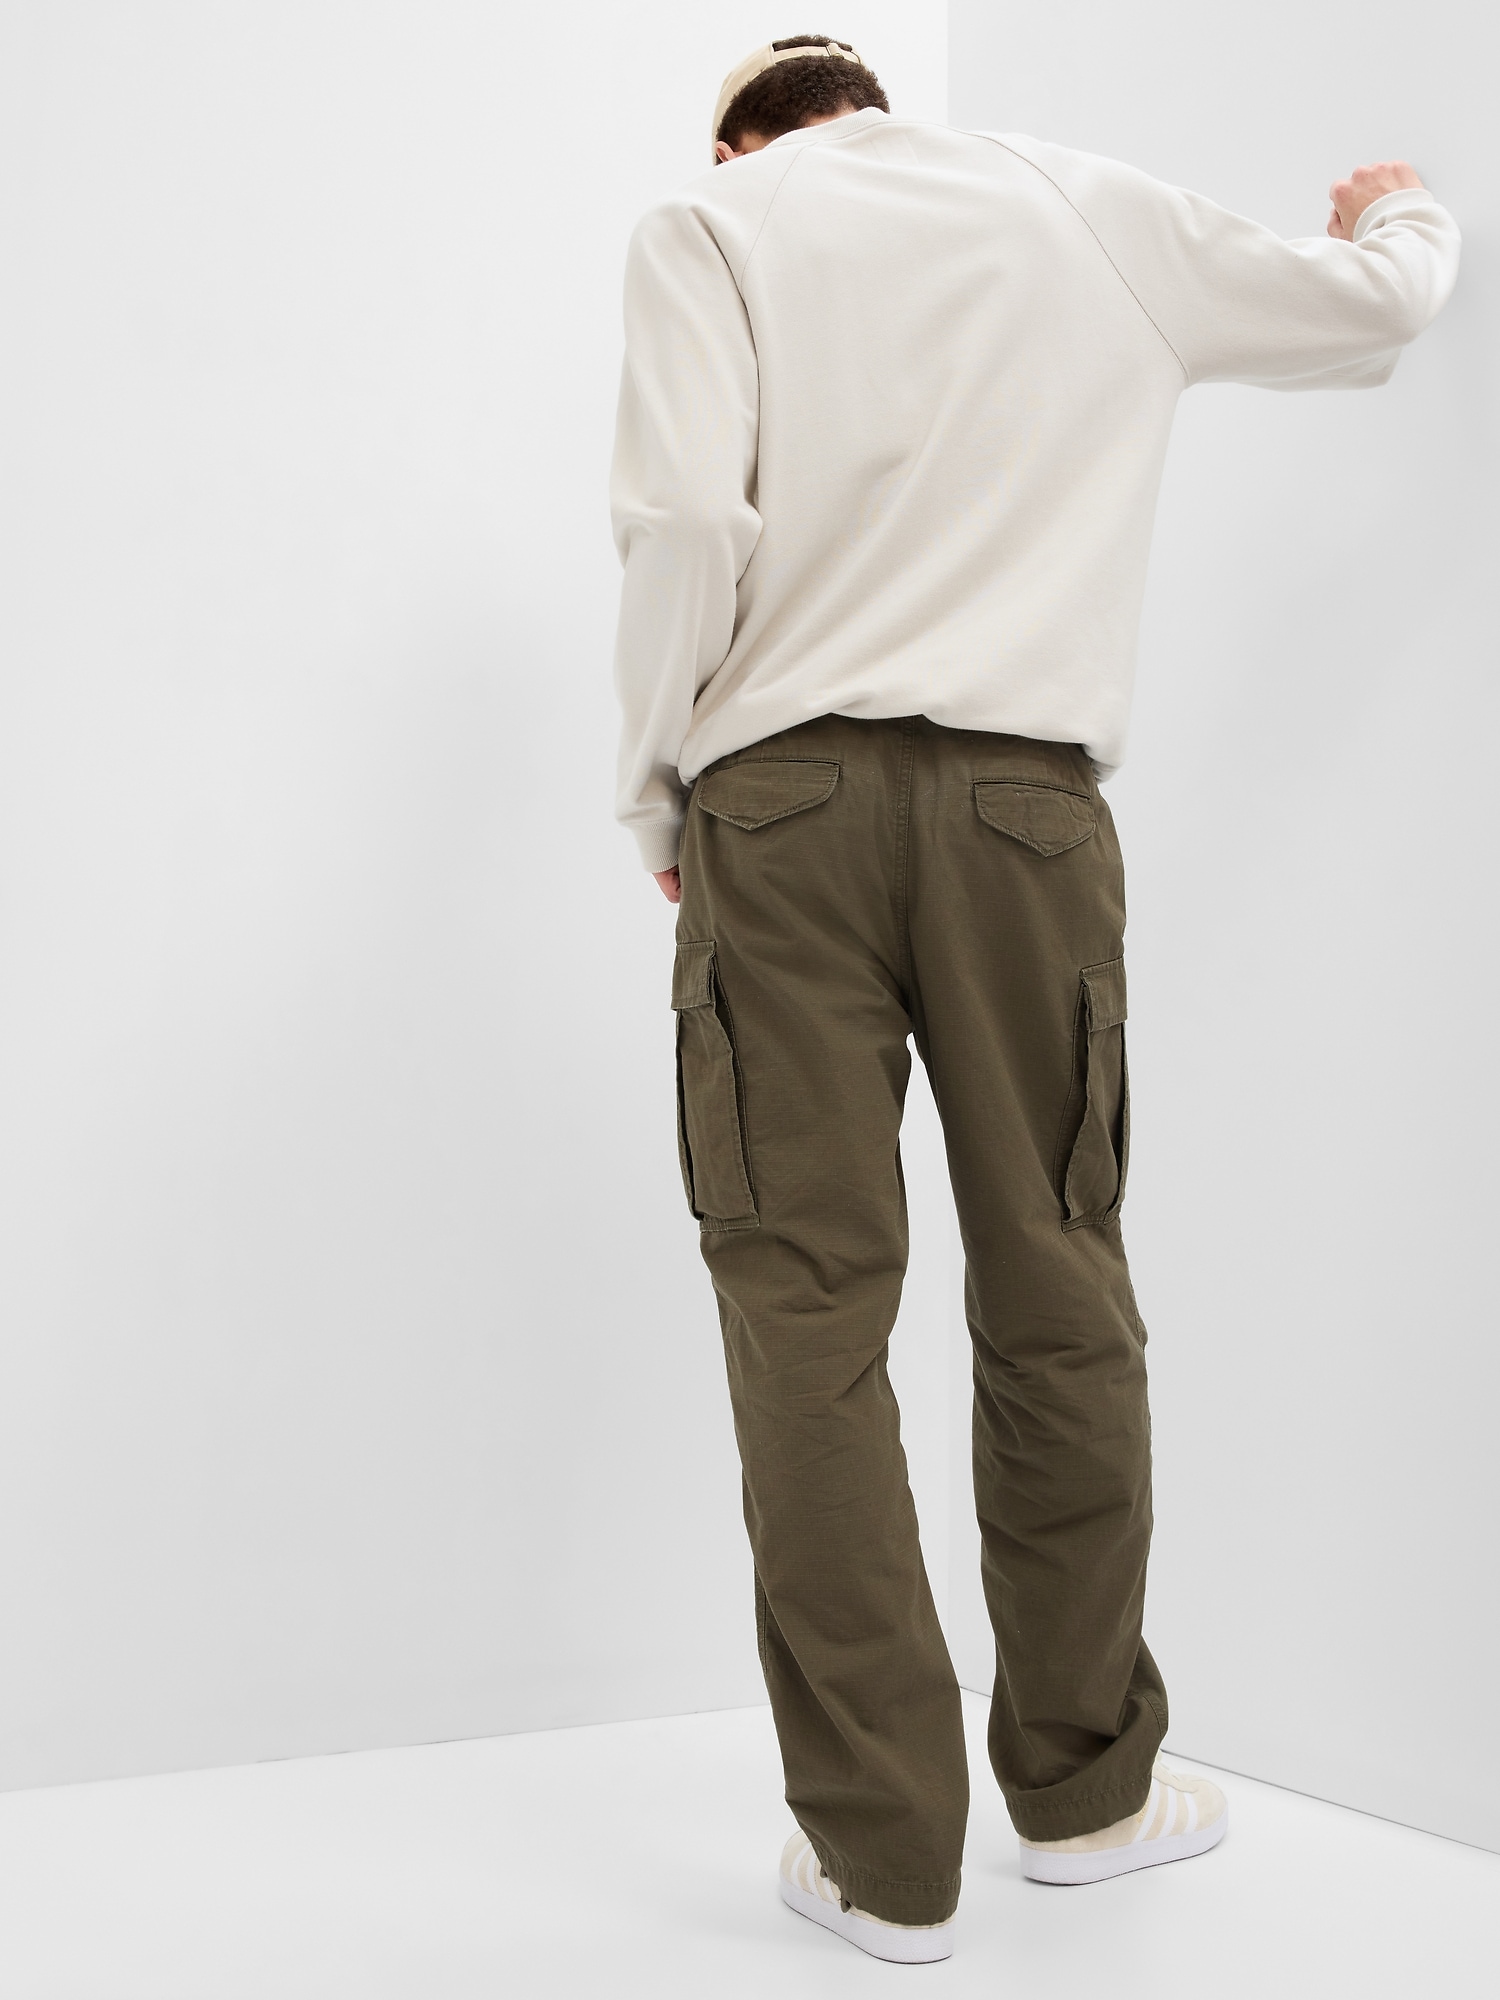 HM Chinos outlet  1800 products on sale  FASHIOLAcouk